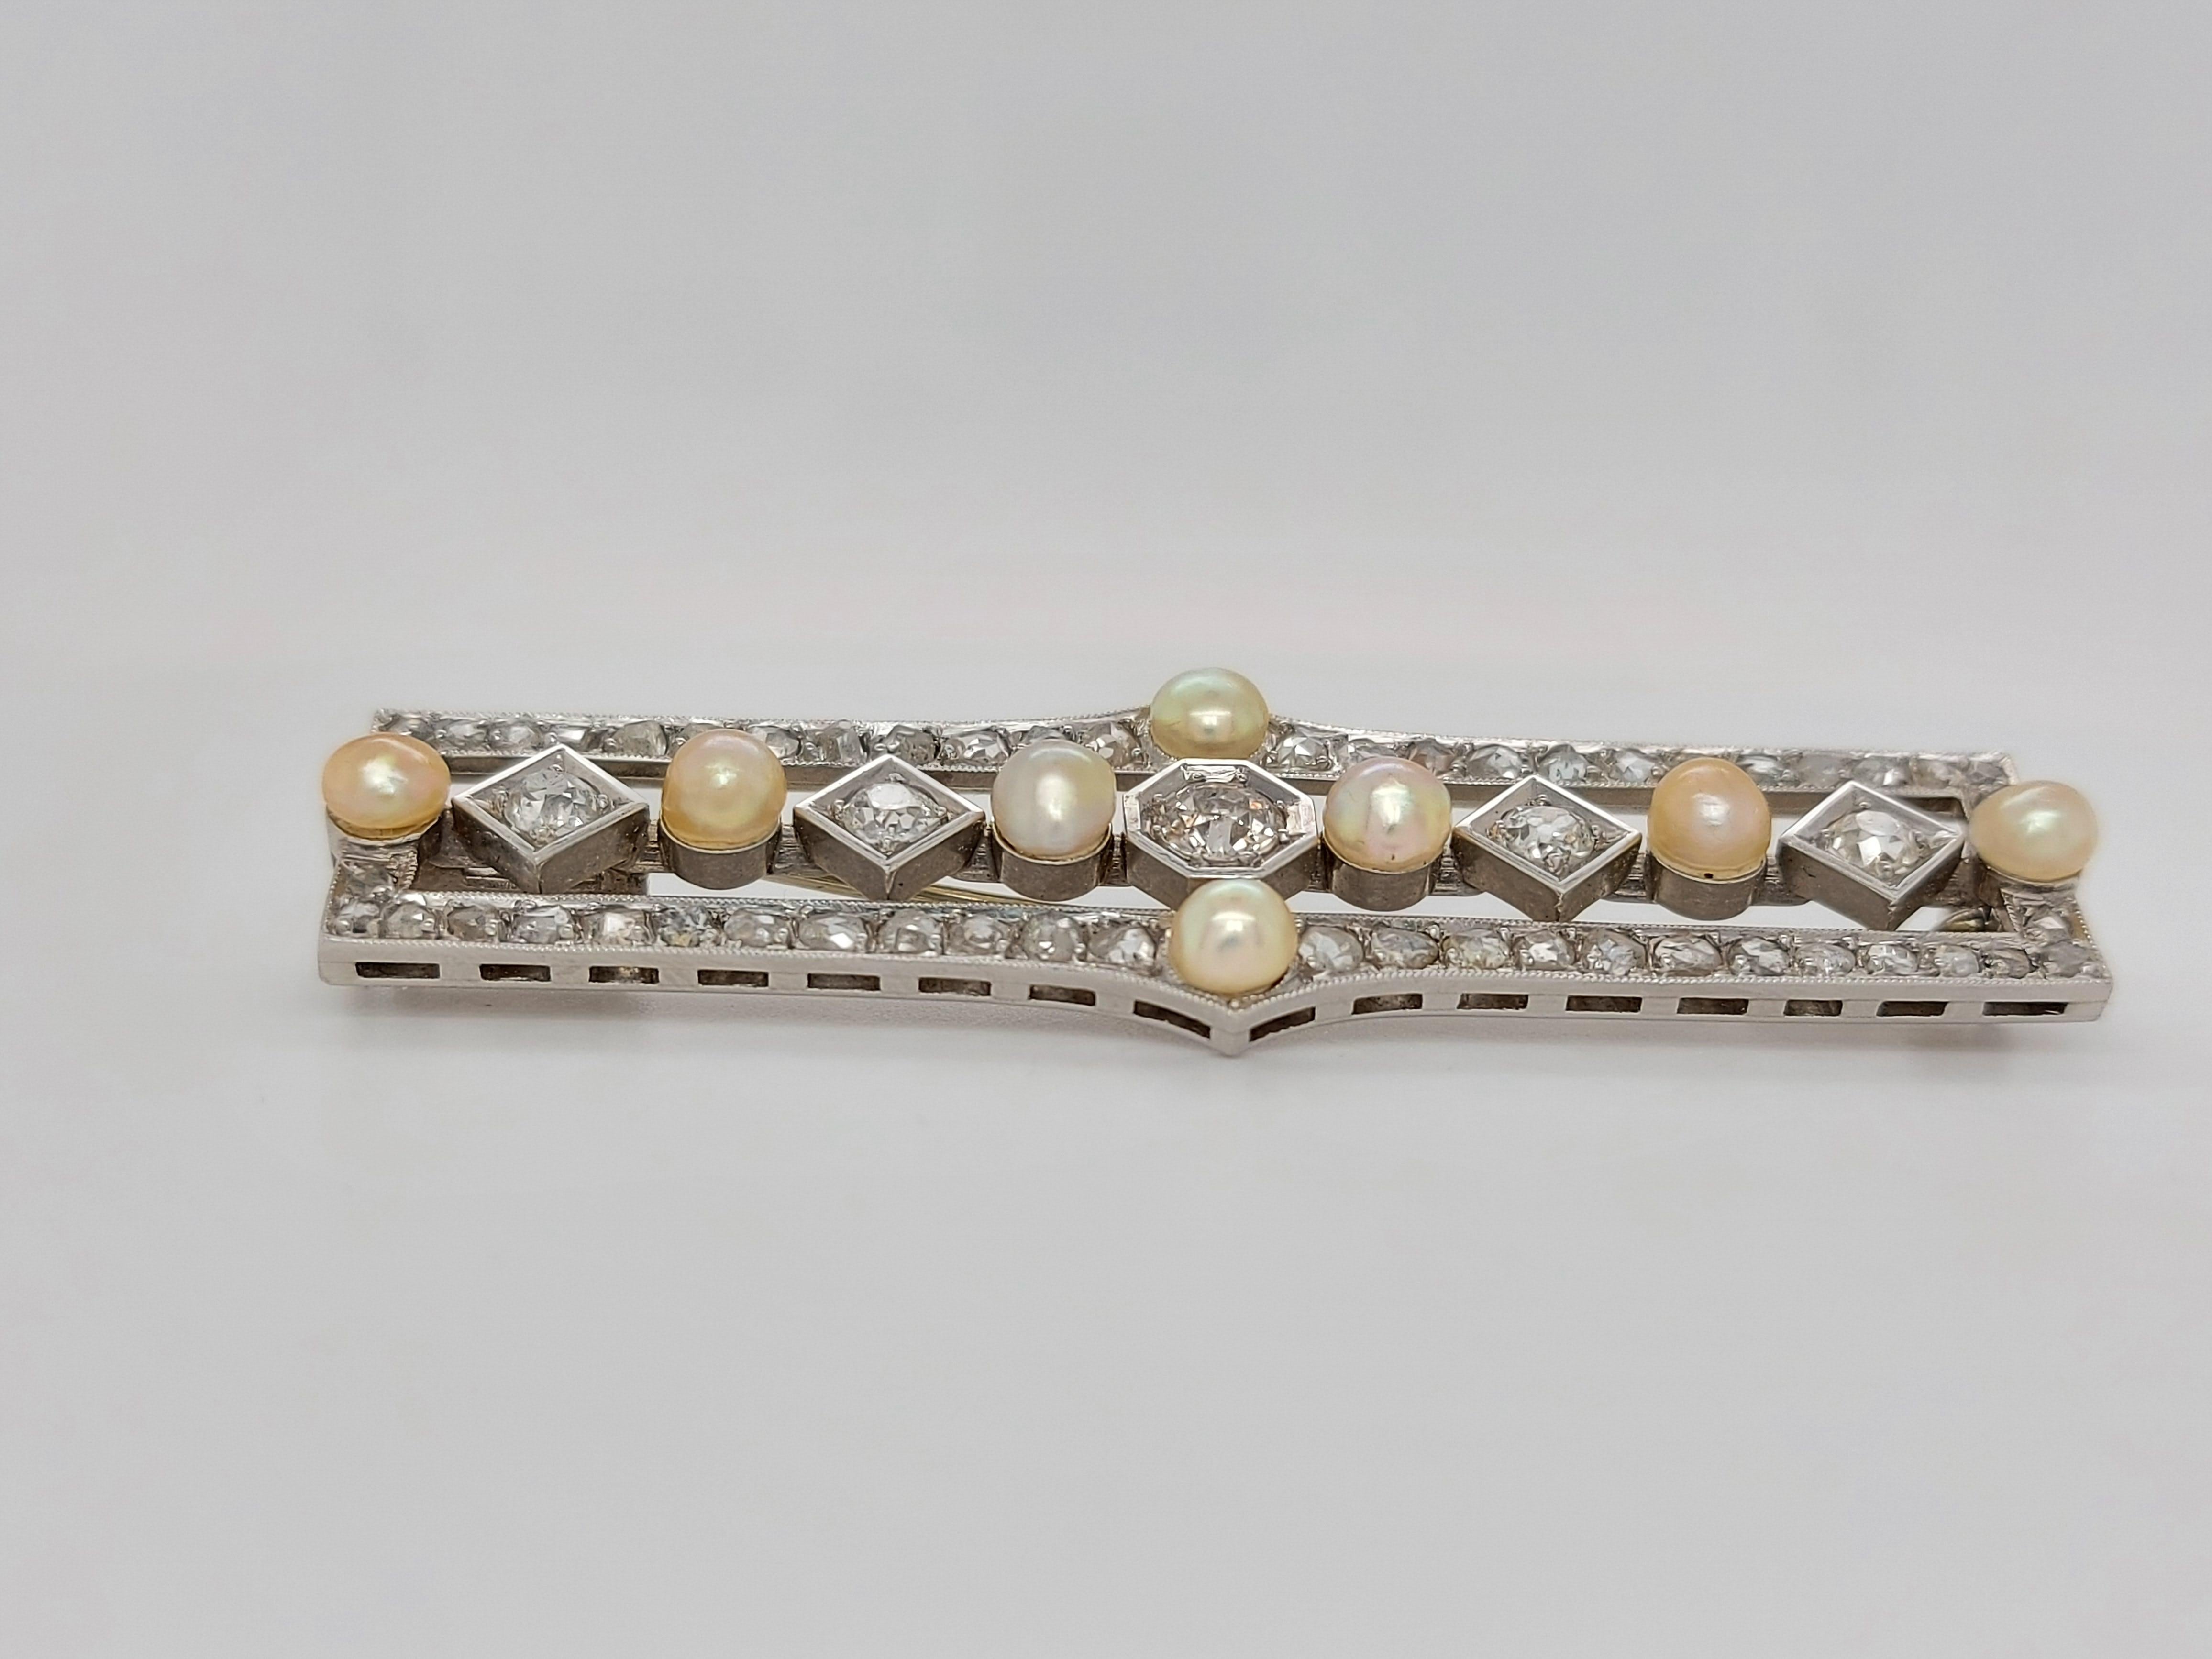 Platinum Handmade Bar Brooch with Diamond and Pearls For Sale 6